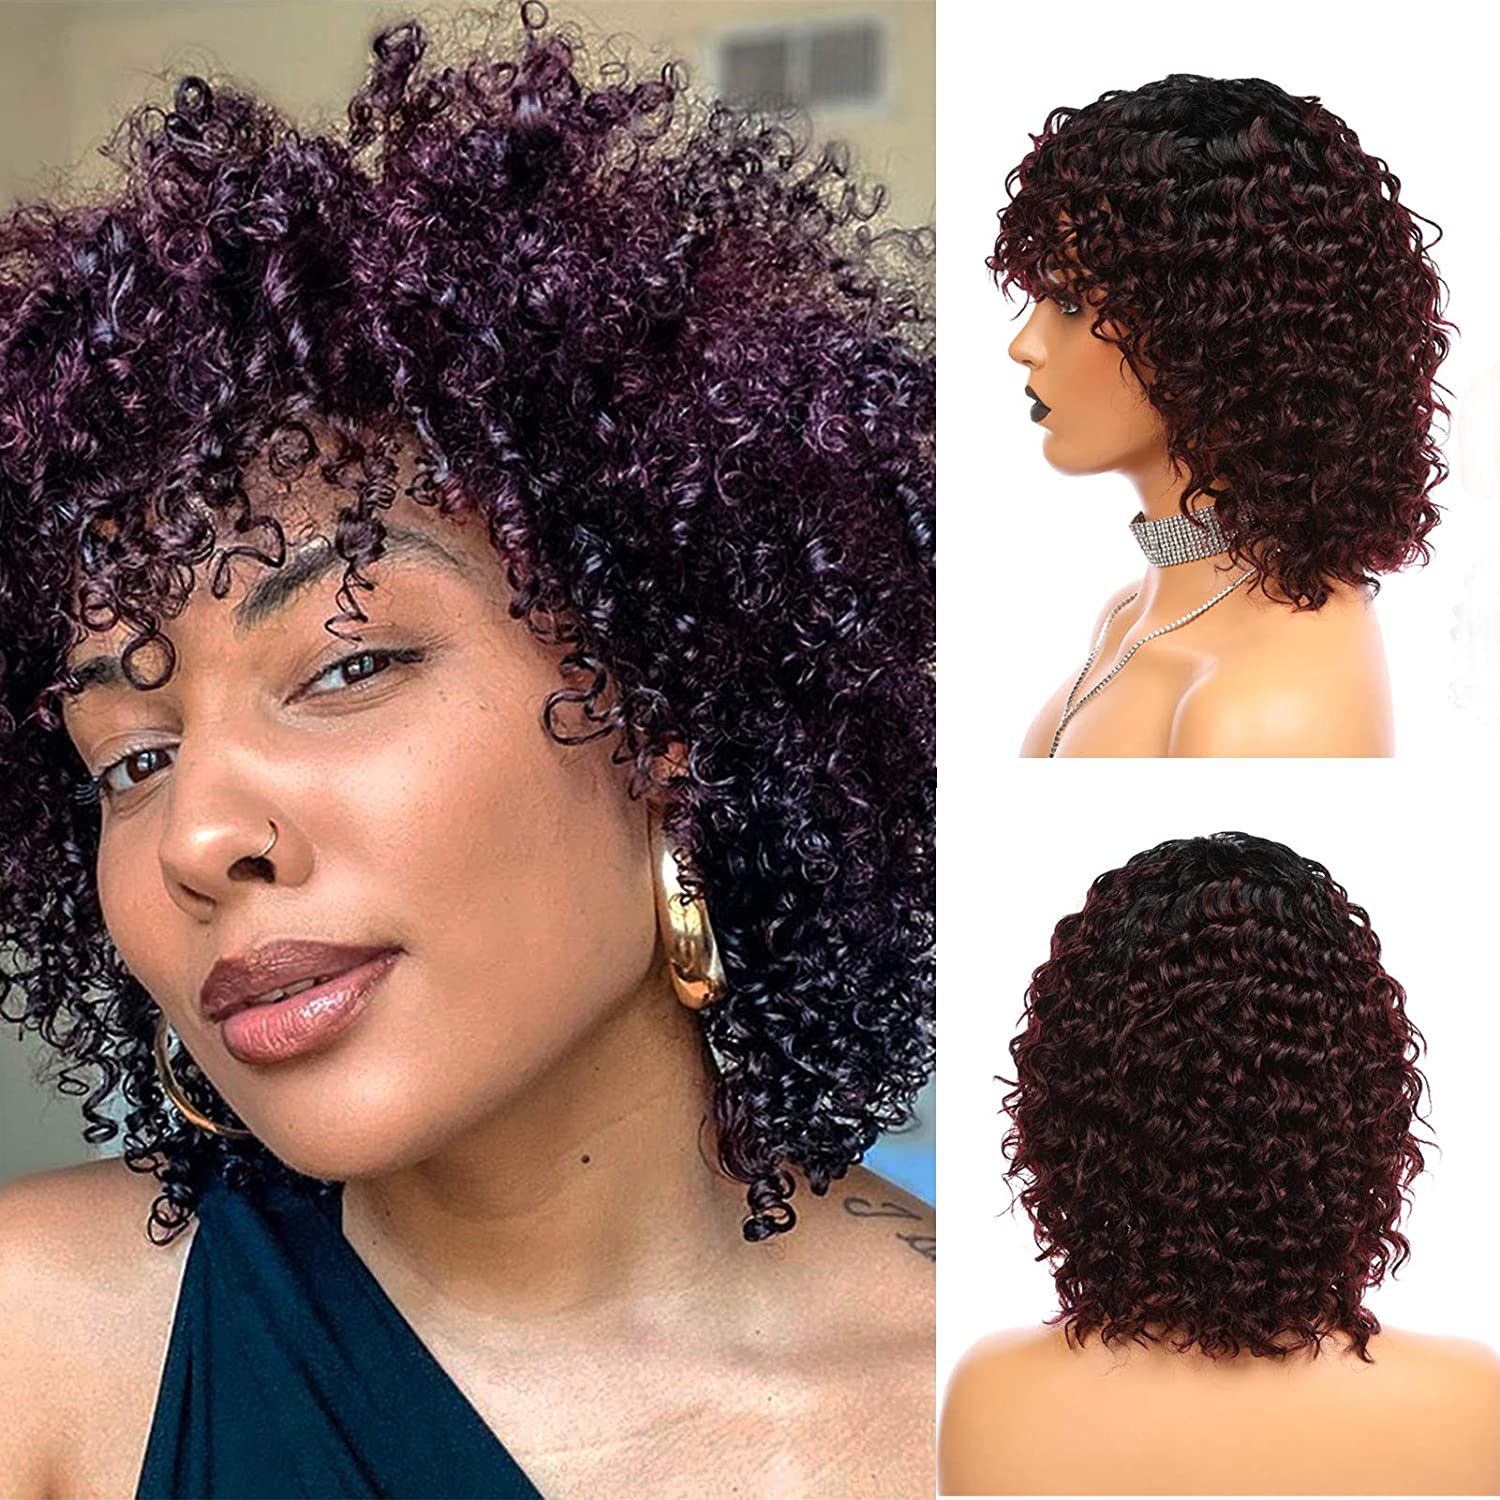 Gluna Hair Short Curly Bob Non Lace Front Machine Made Wig 1B/99J Ombre Colored Wig with Dark Roots for Black Women